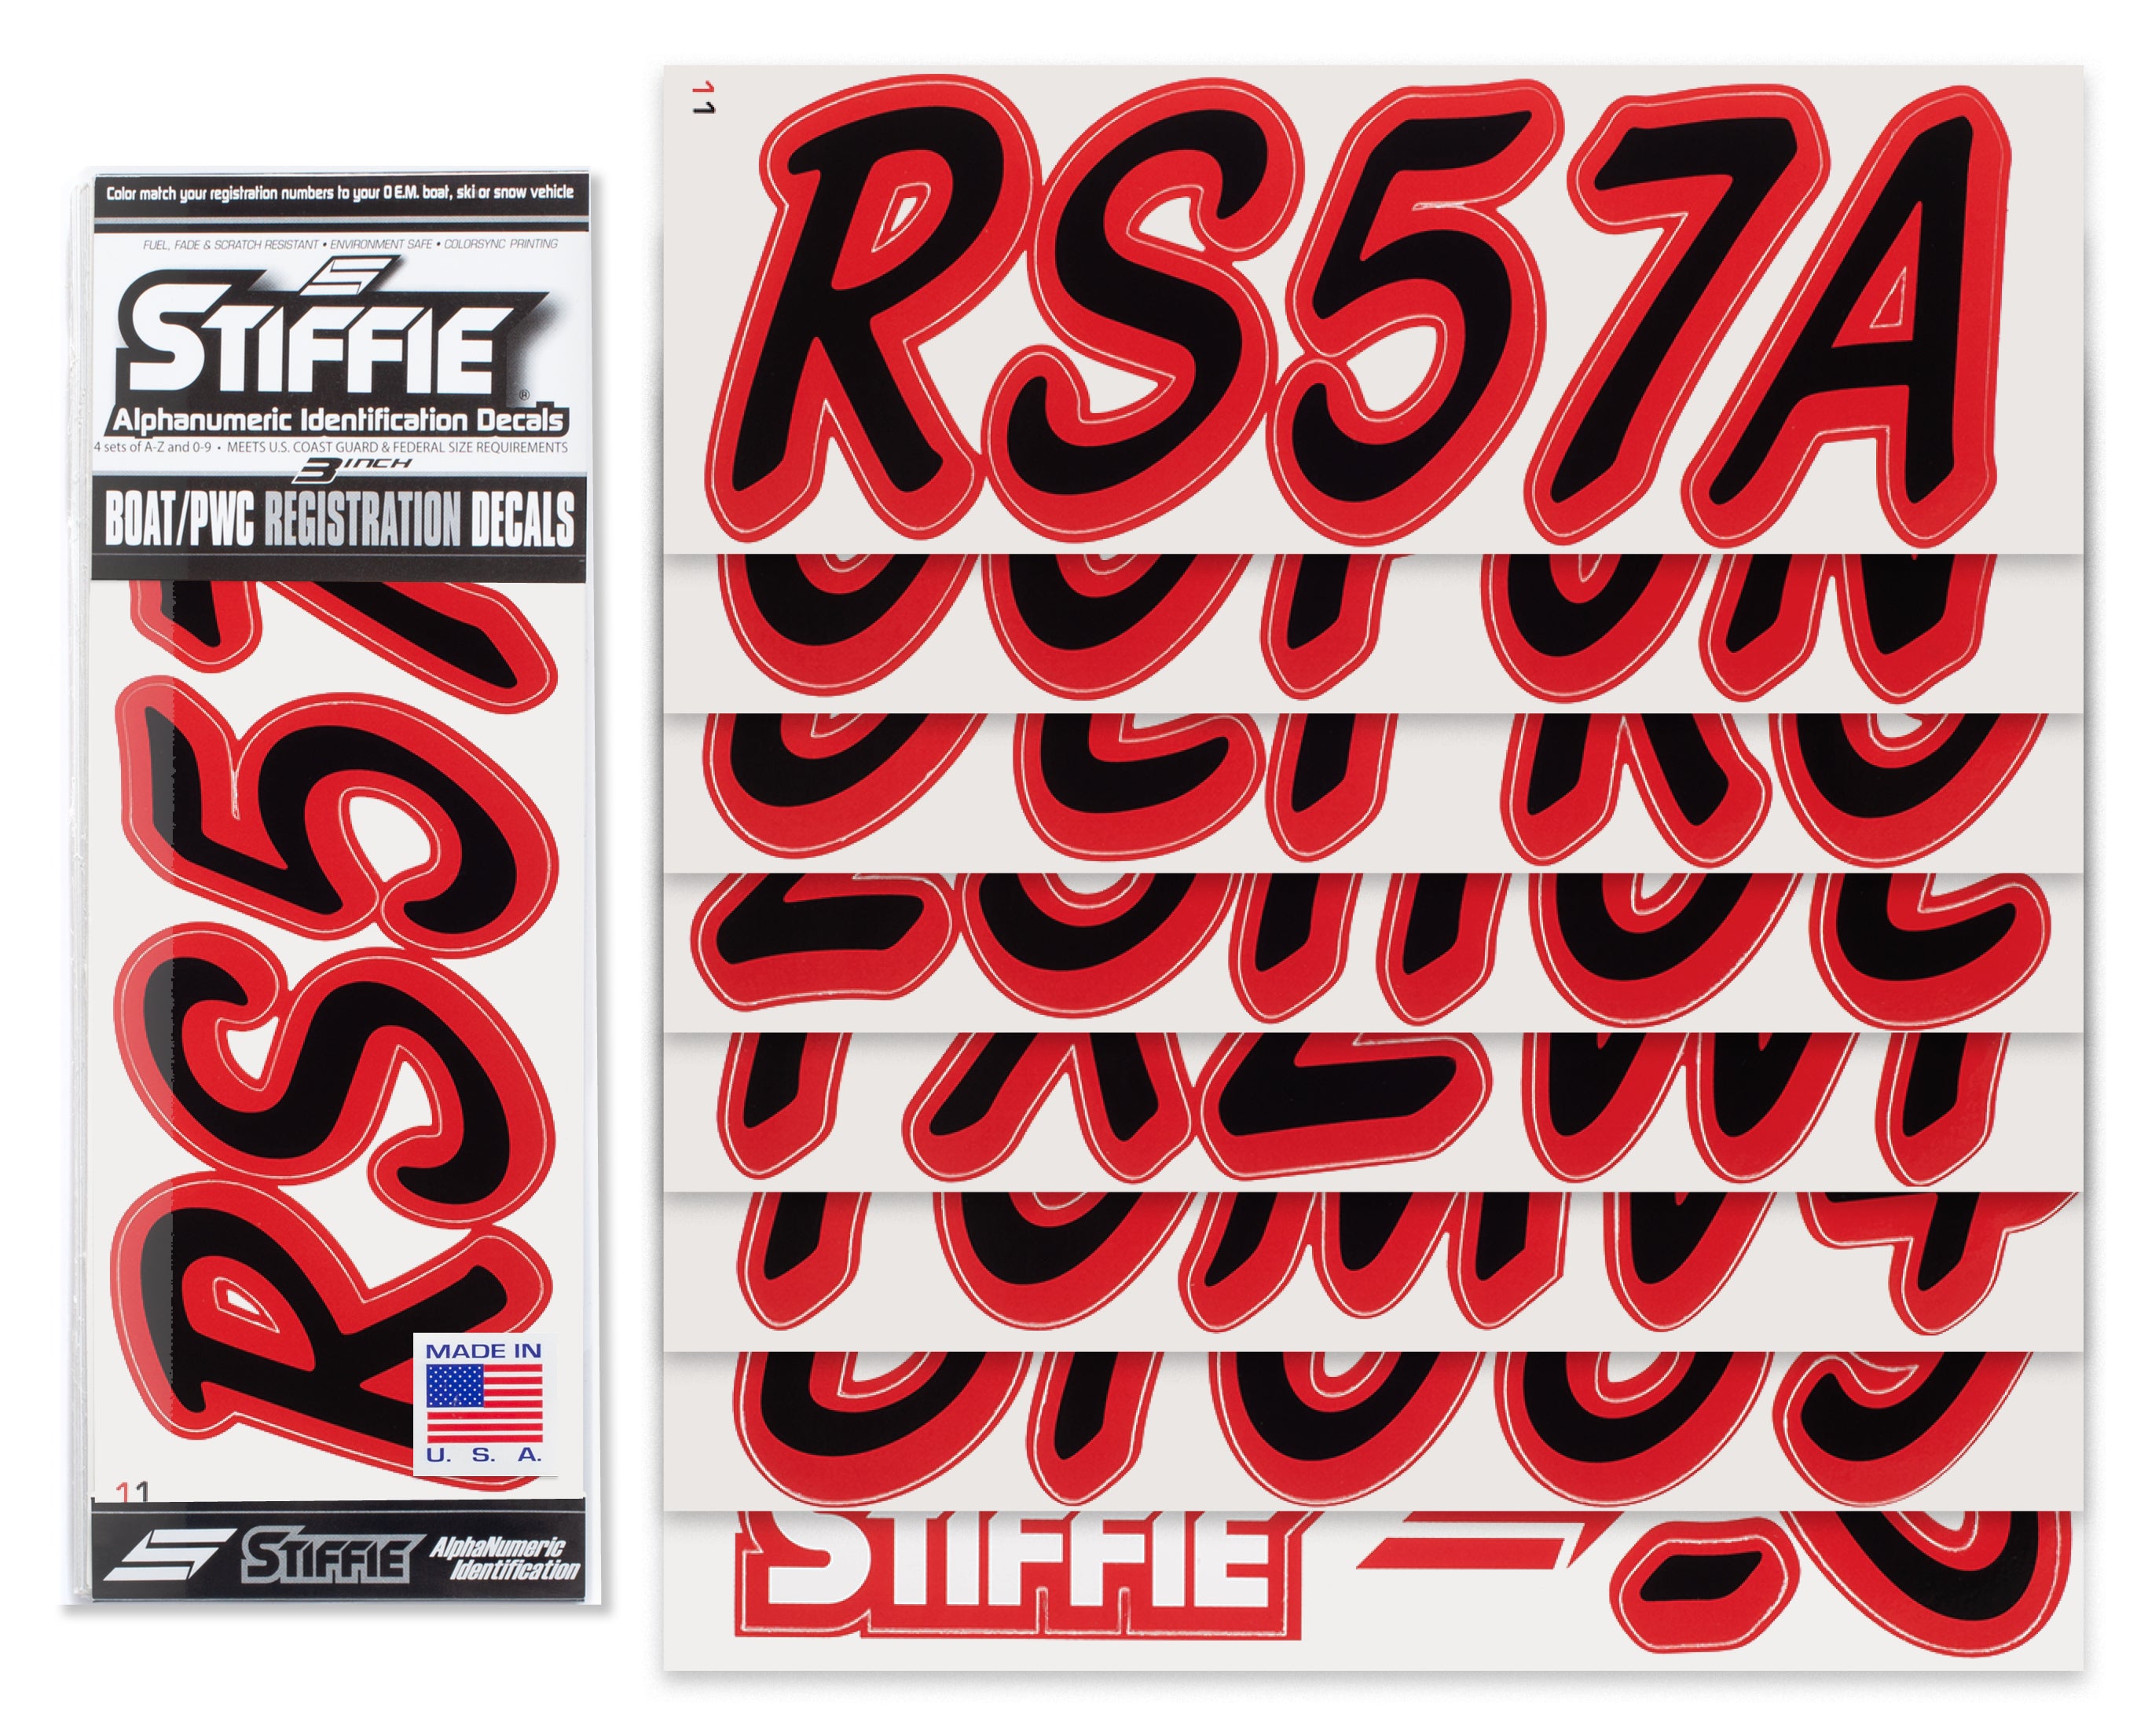 STIFFIE Whipline Solid Black/Red 3" Alpha-Numeric Registration Identification Numbers Stickers Decals for Boats & Personal Watercraft